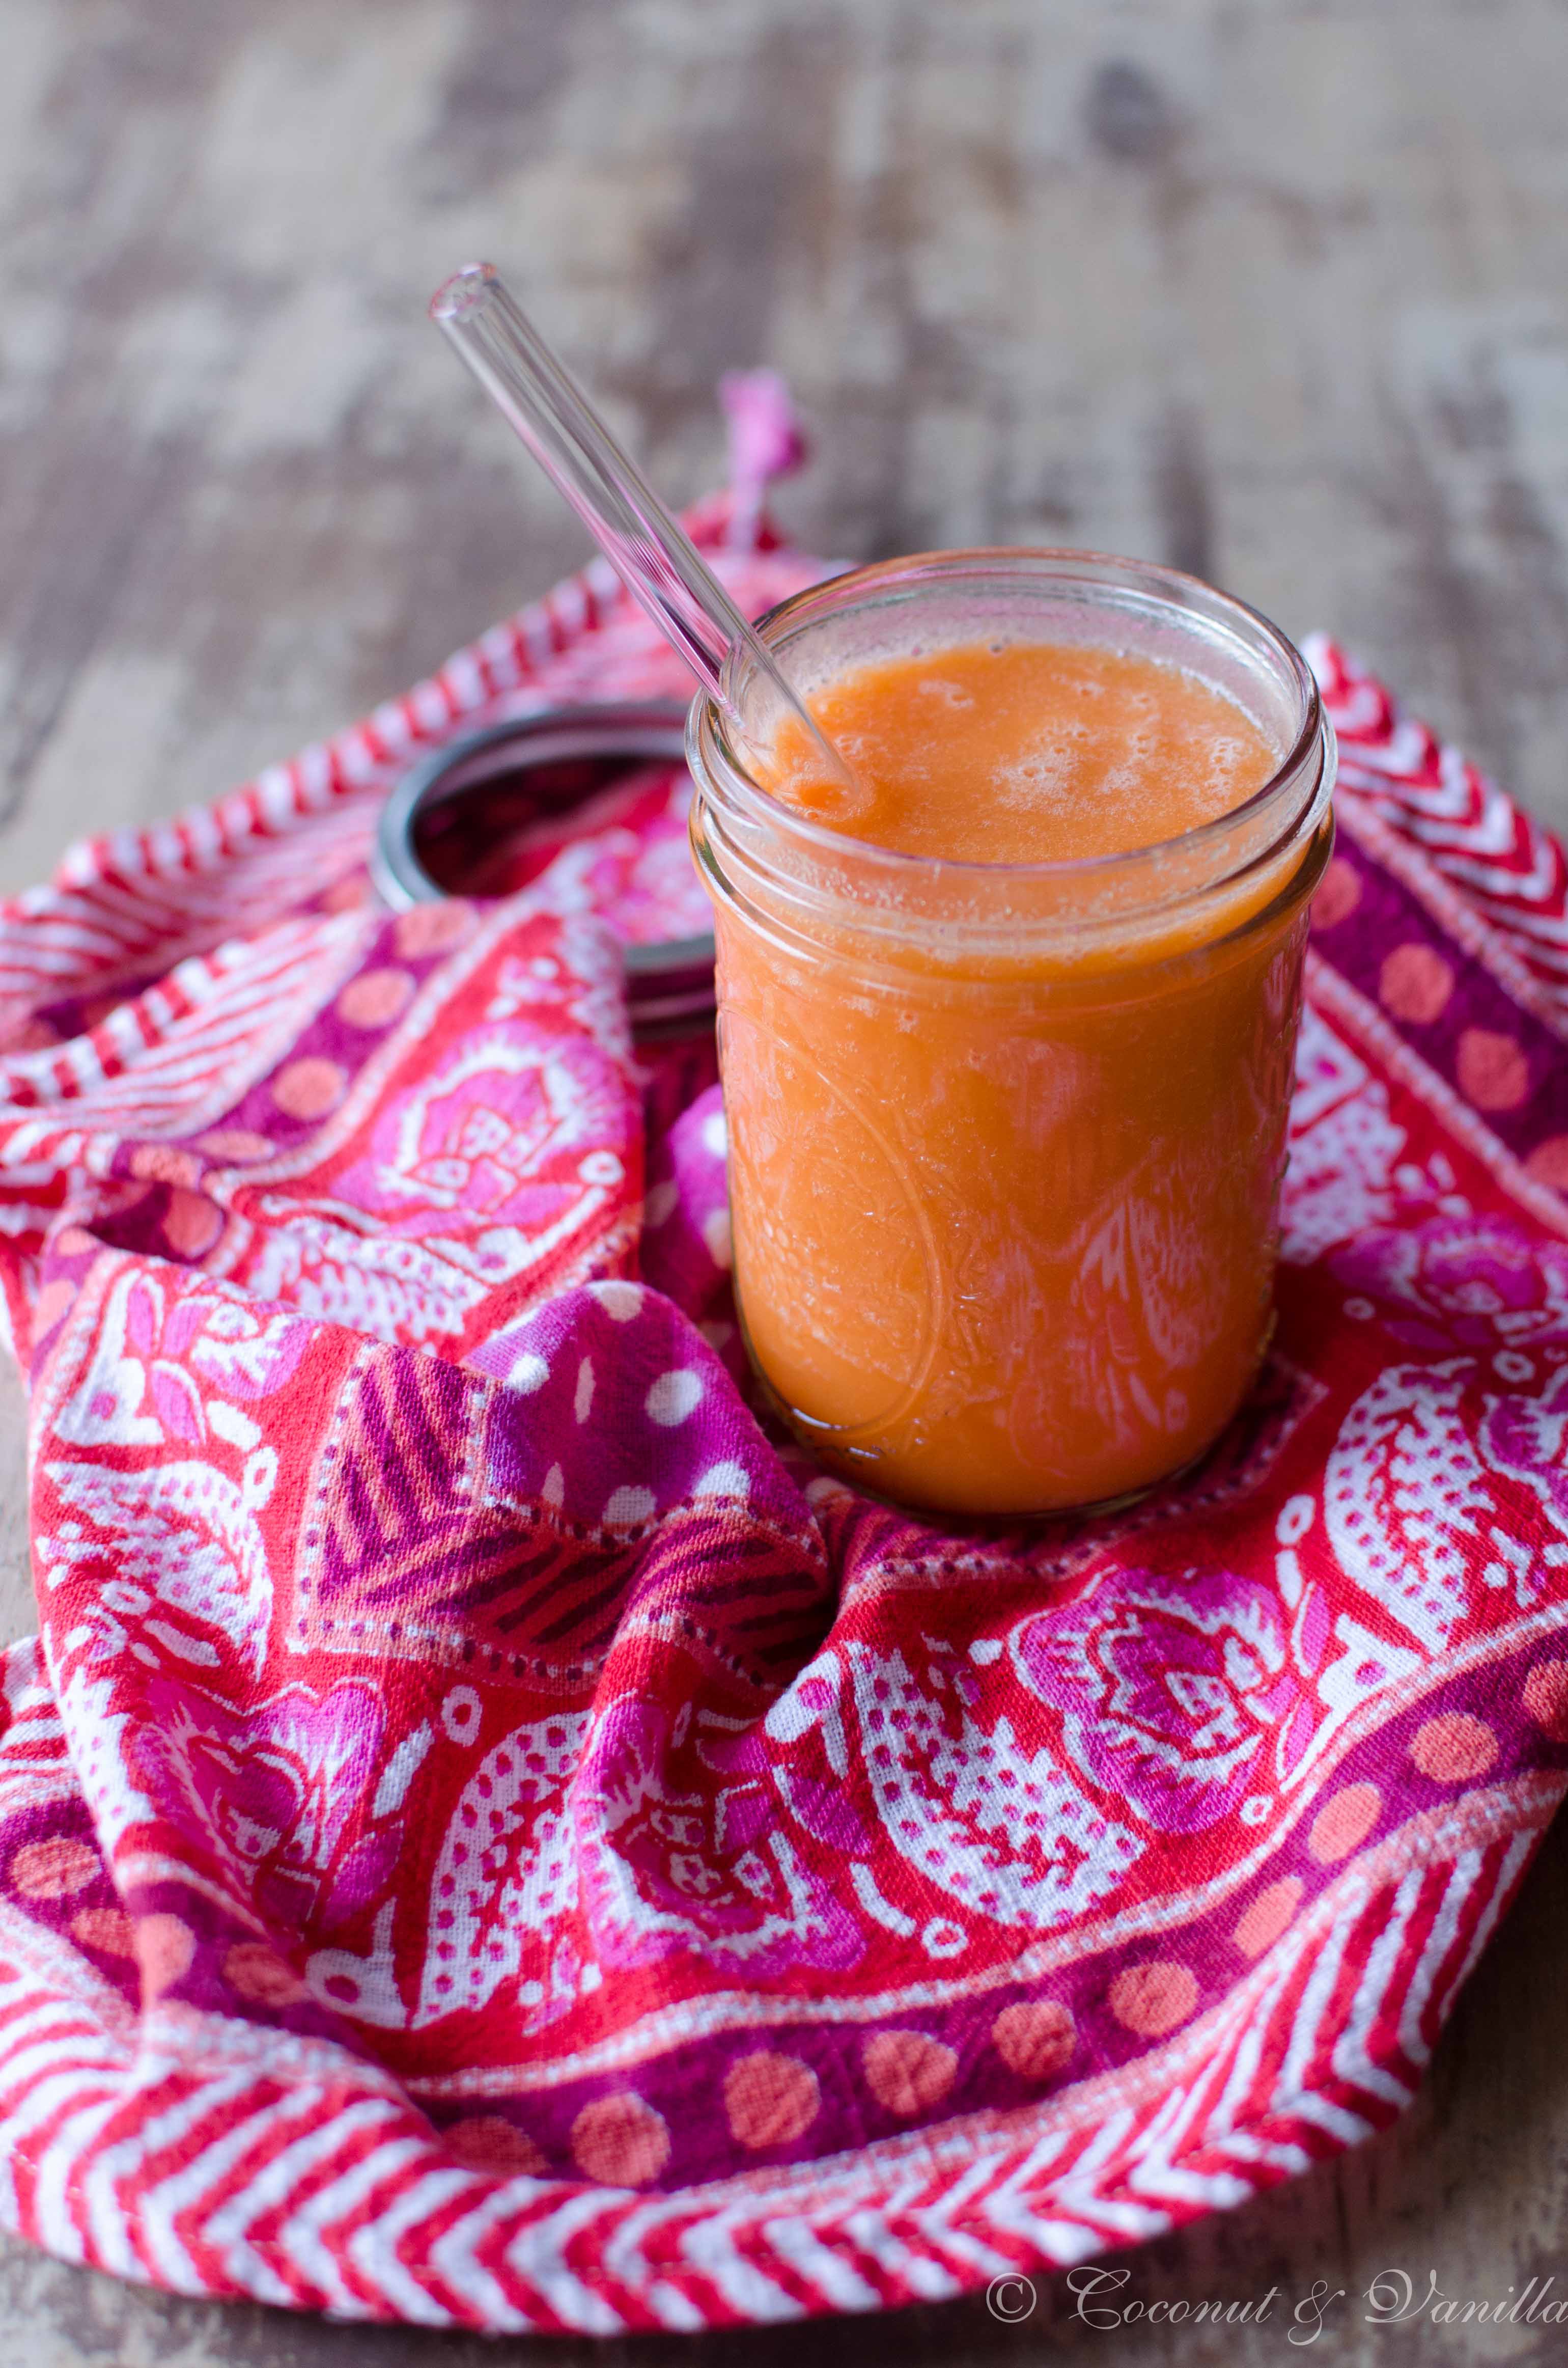 Ananas-Möhren-Smoothie mit Ingwer - Pineapple Carrot Smoothie with Ginger by Coconut & Vanilla